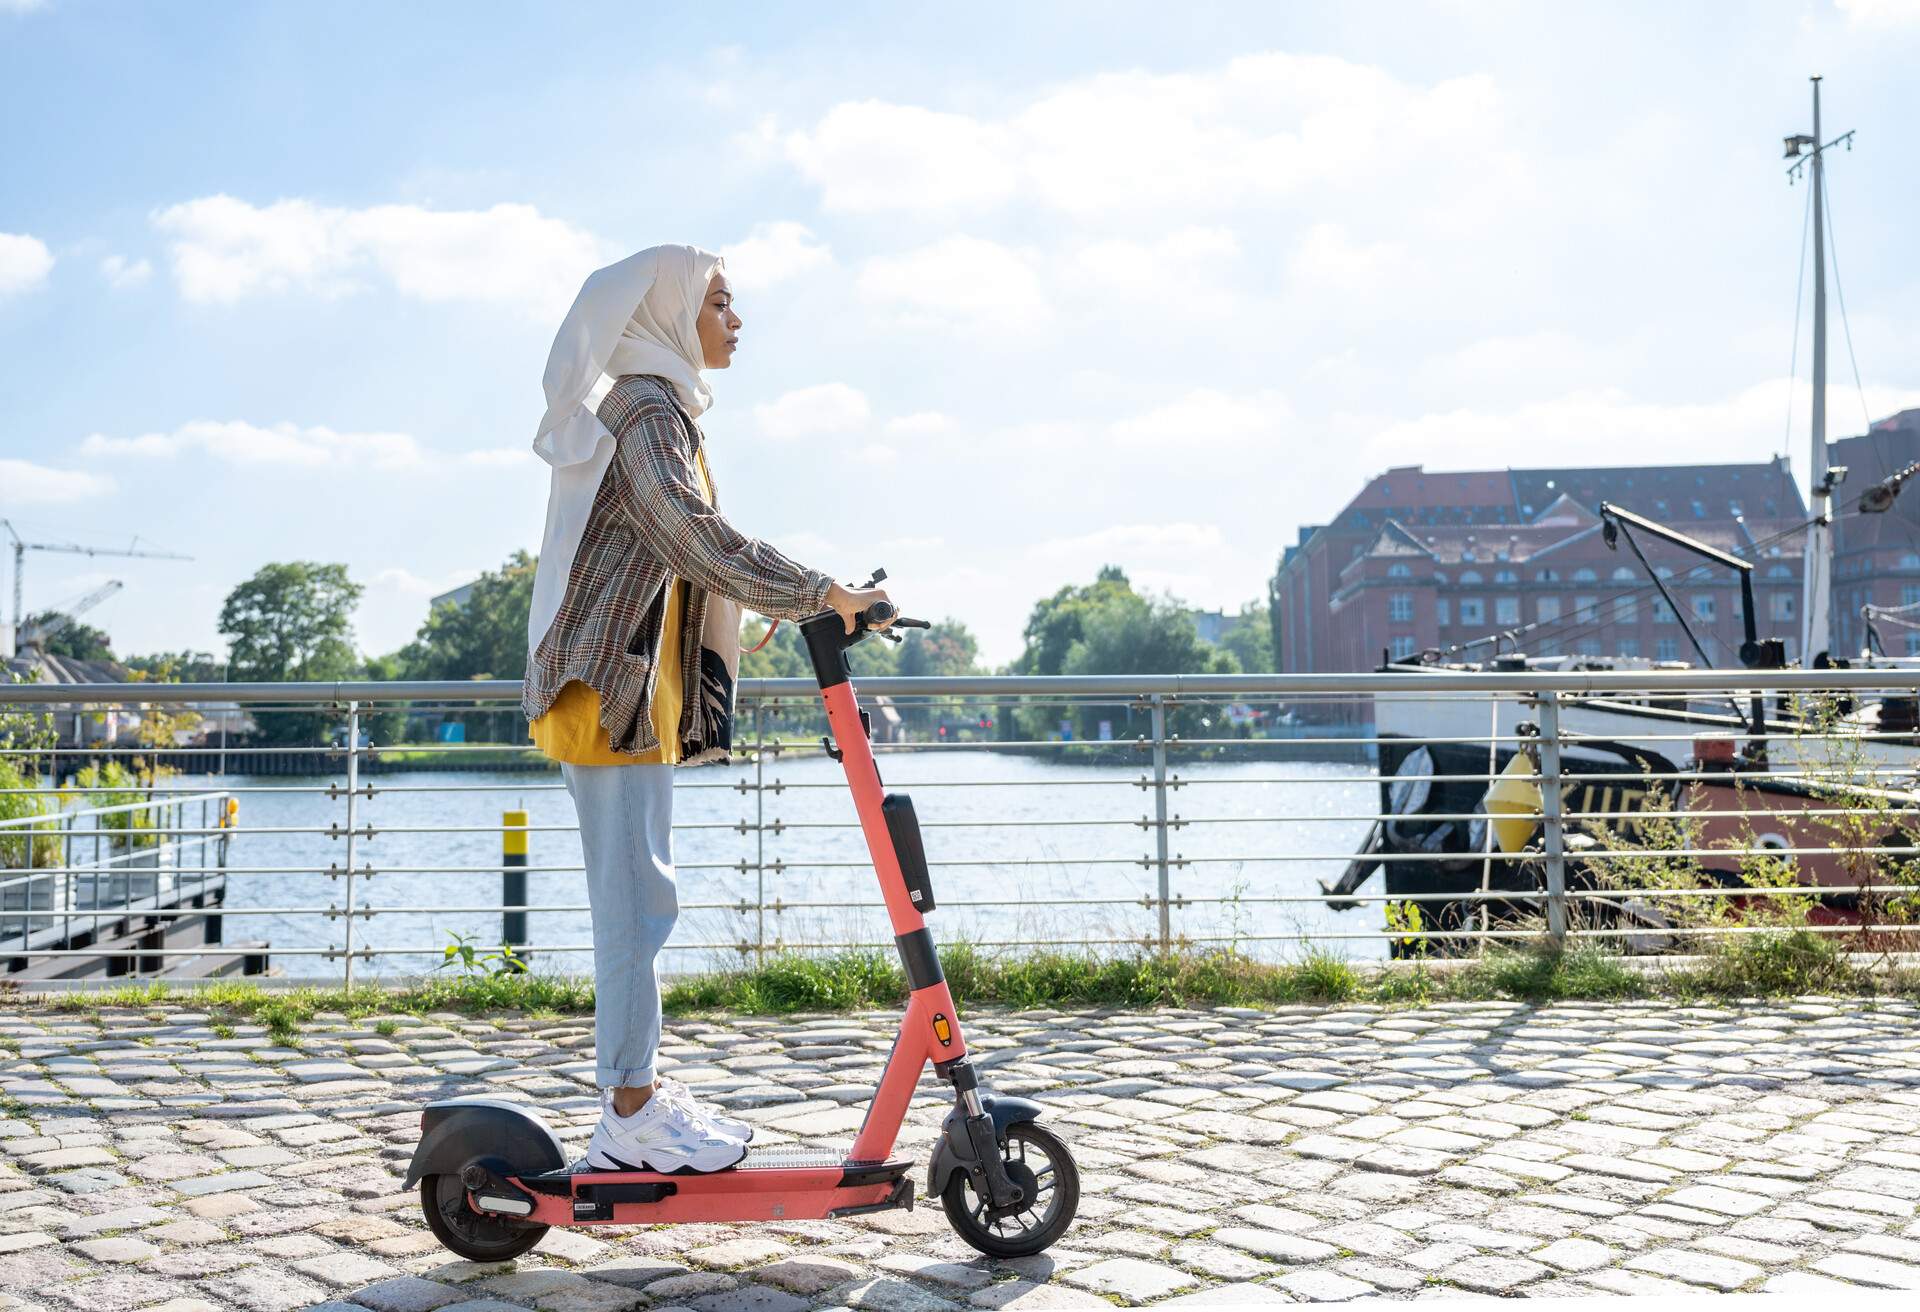 A woman in a hijab rides an e-scooter along the river.